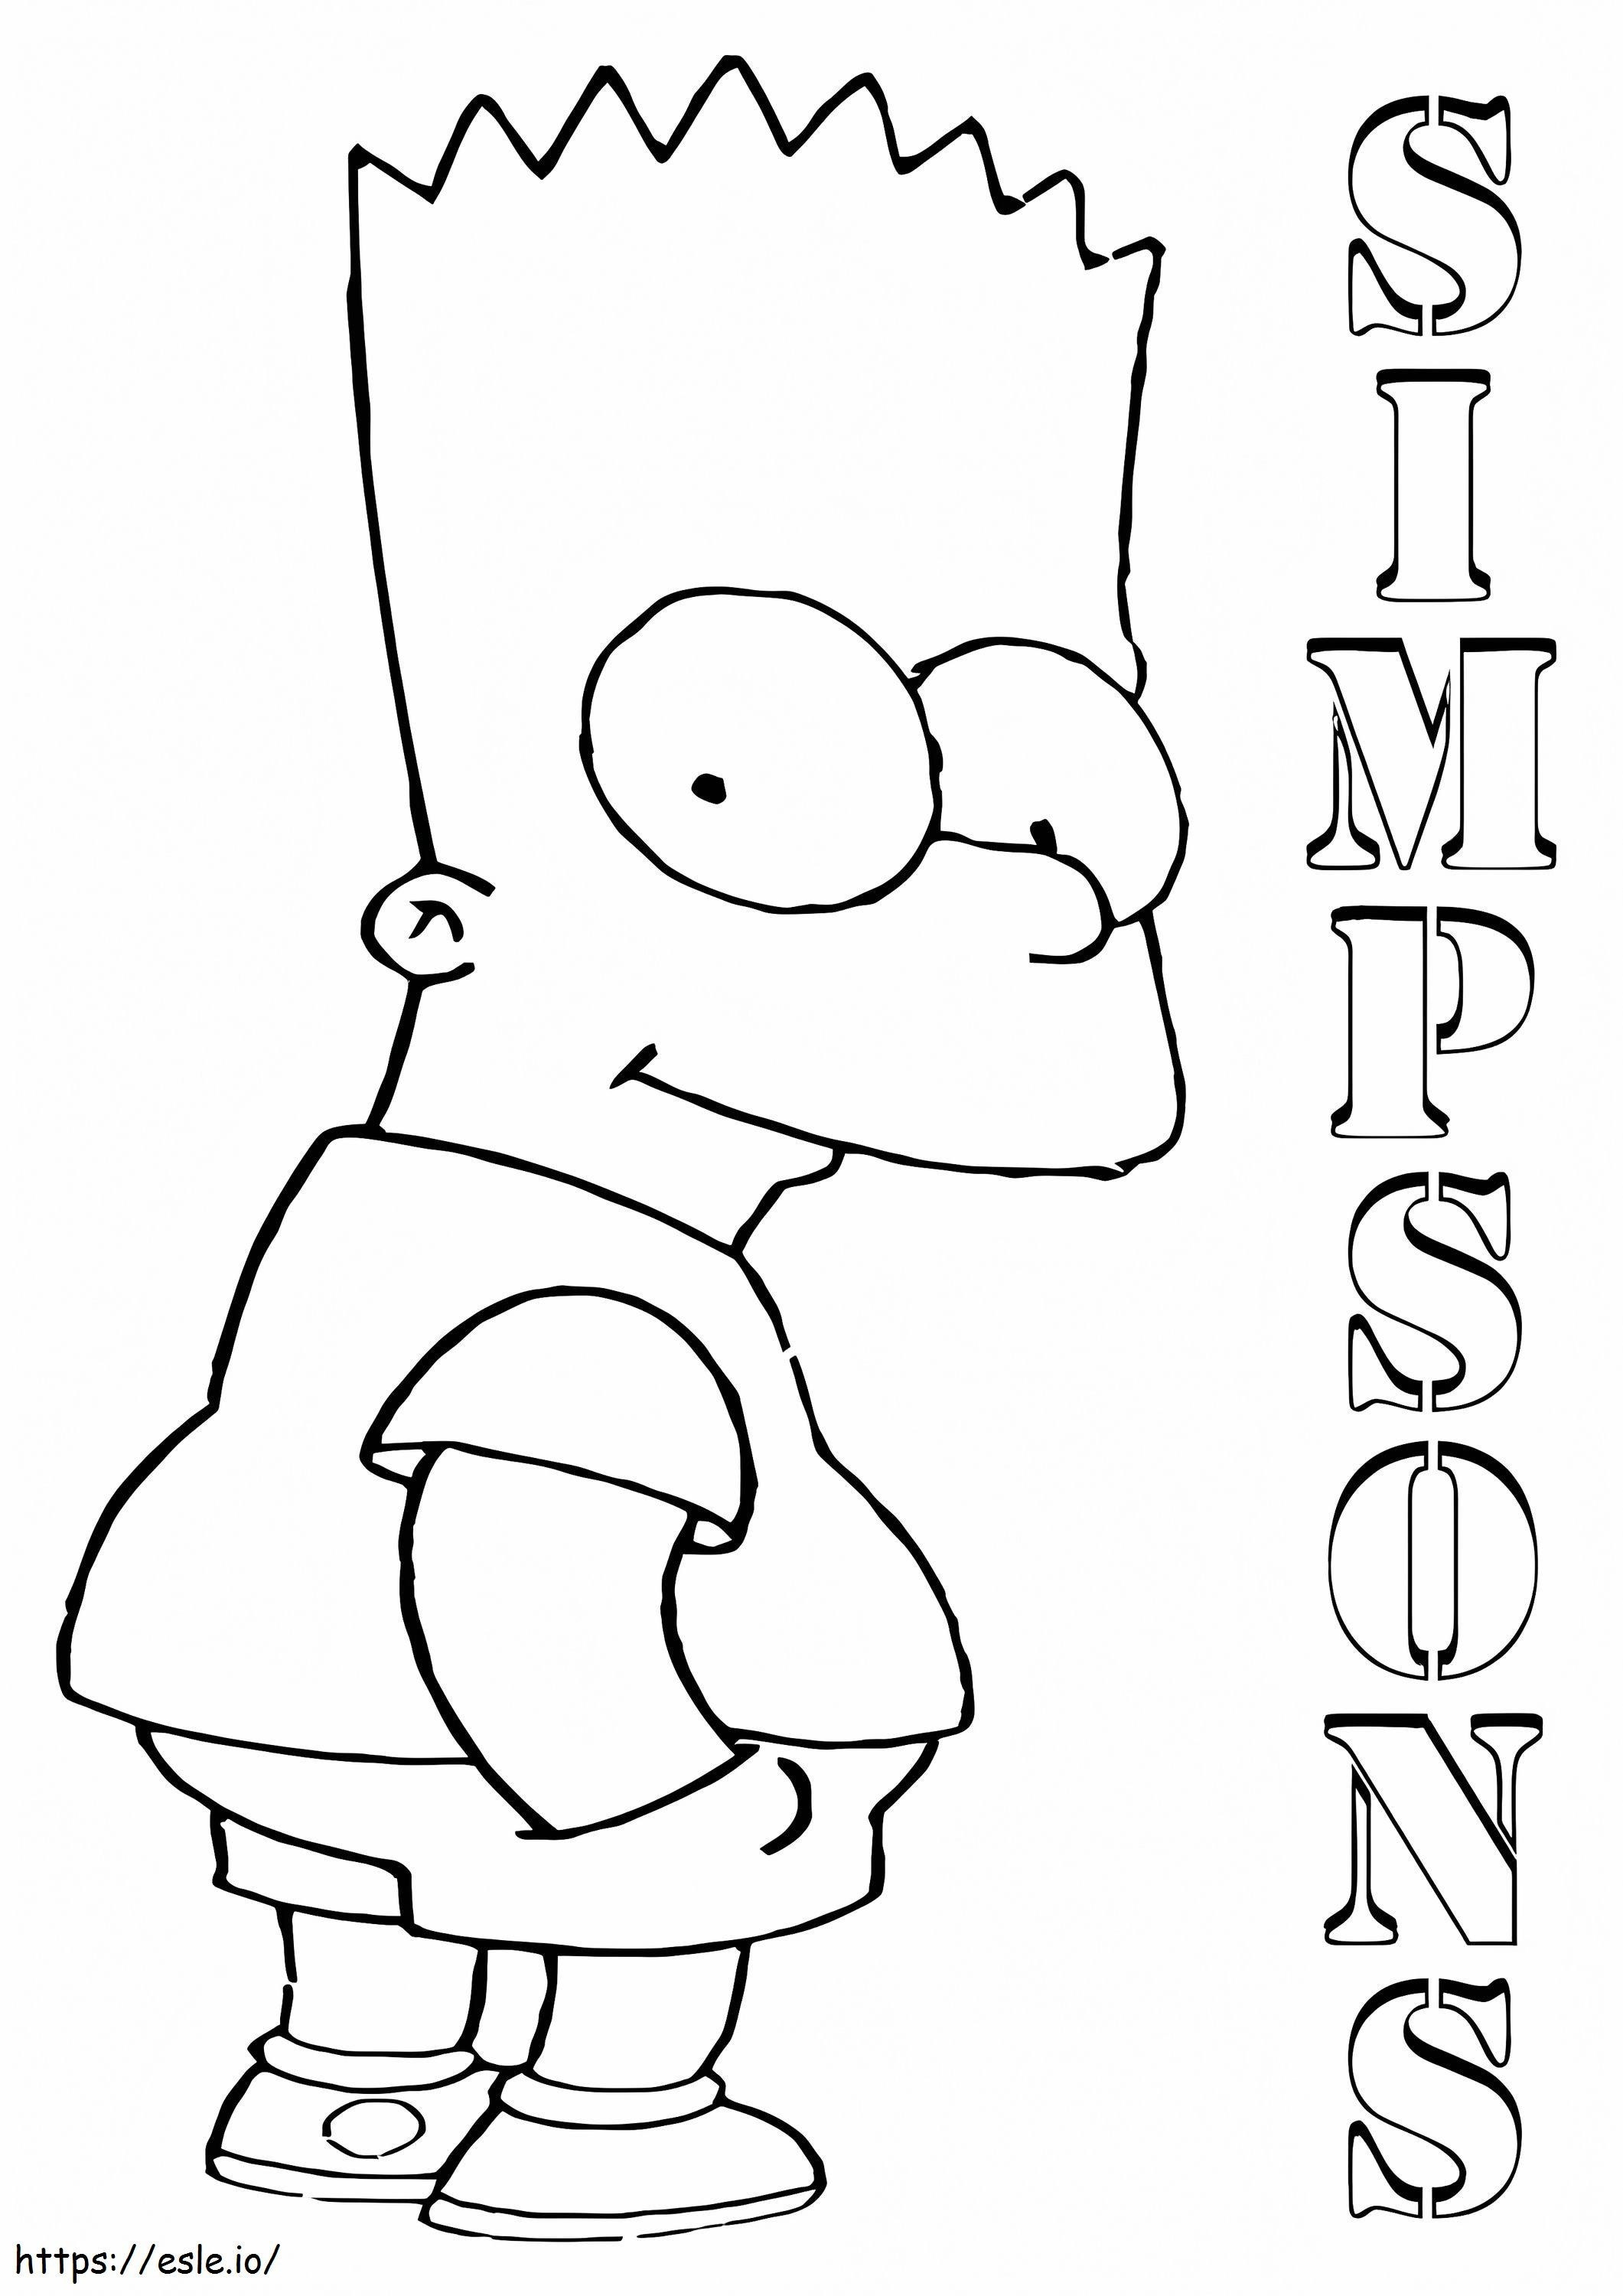 Bart Simpson Smiling coloring page